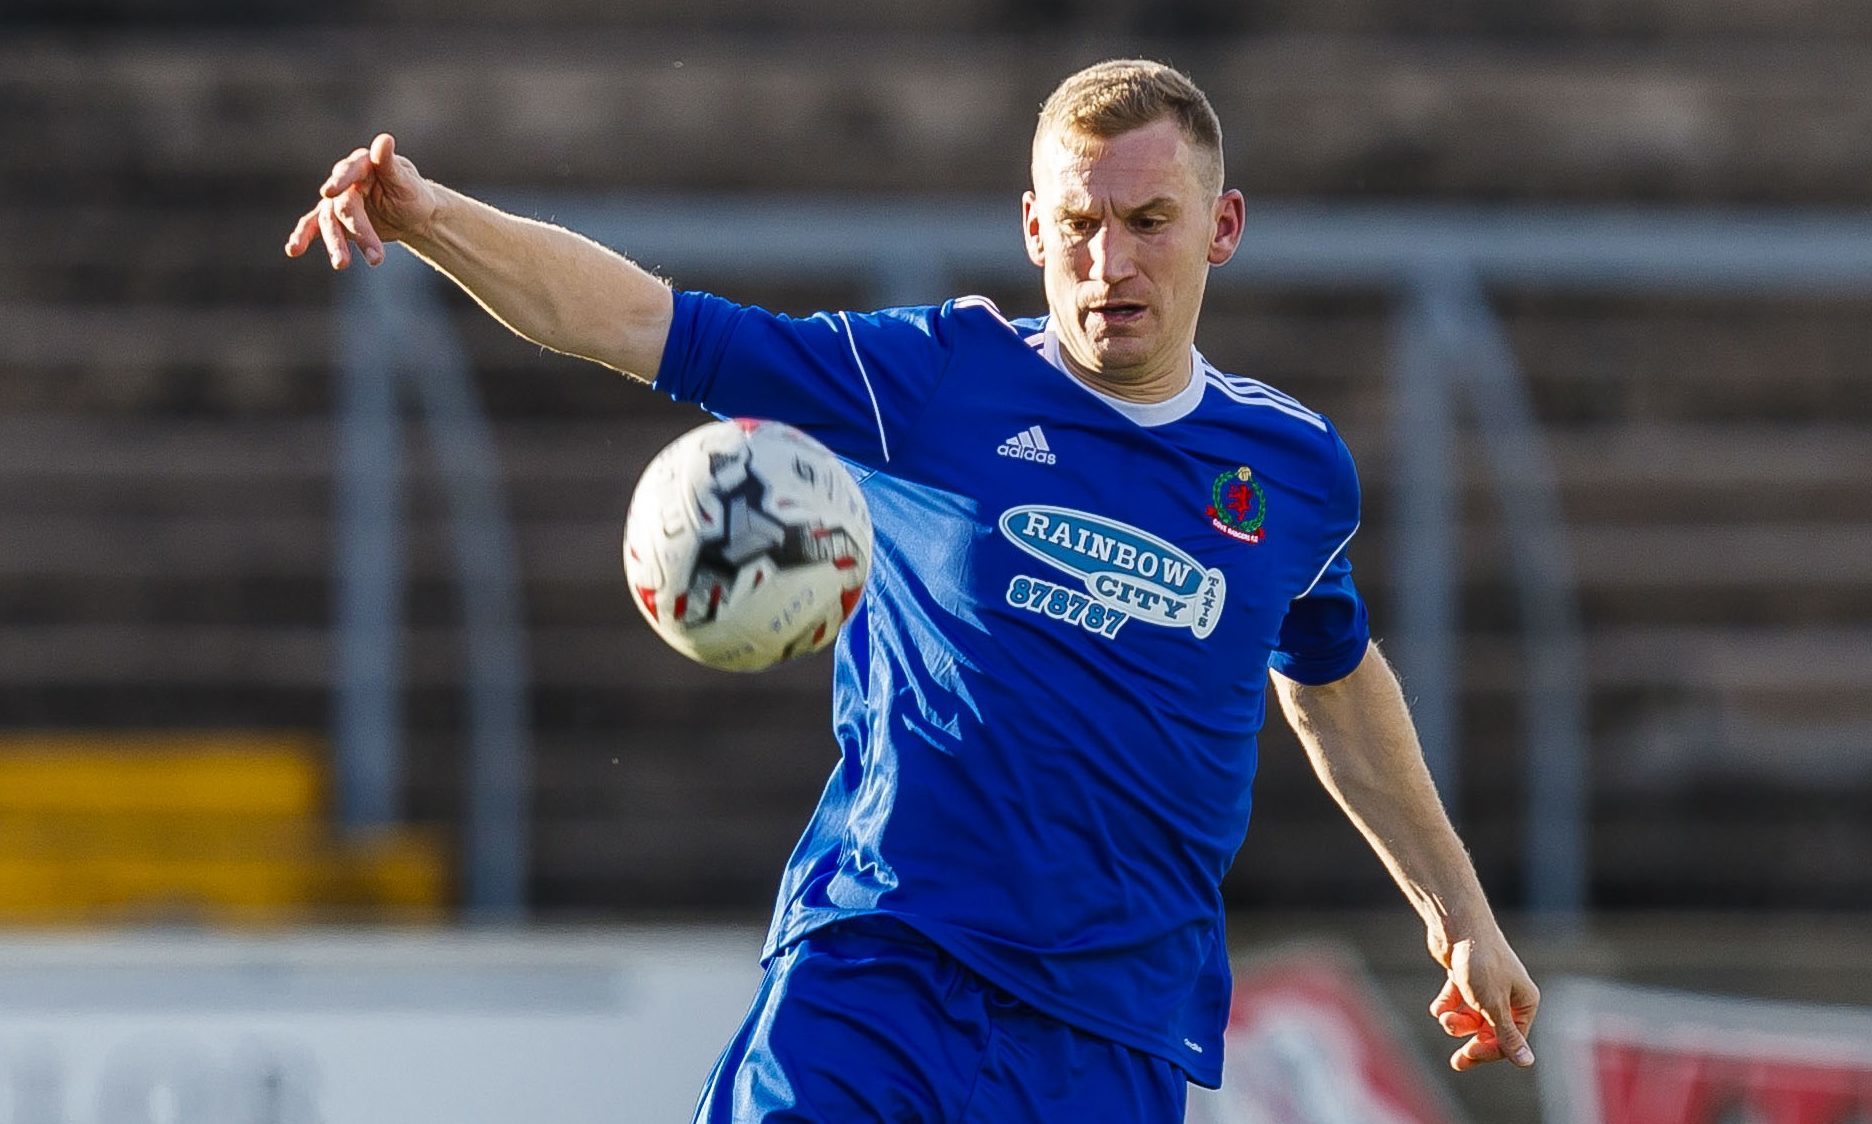 Cove Rangers' Eric Watson in action.